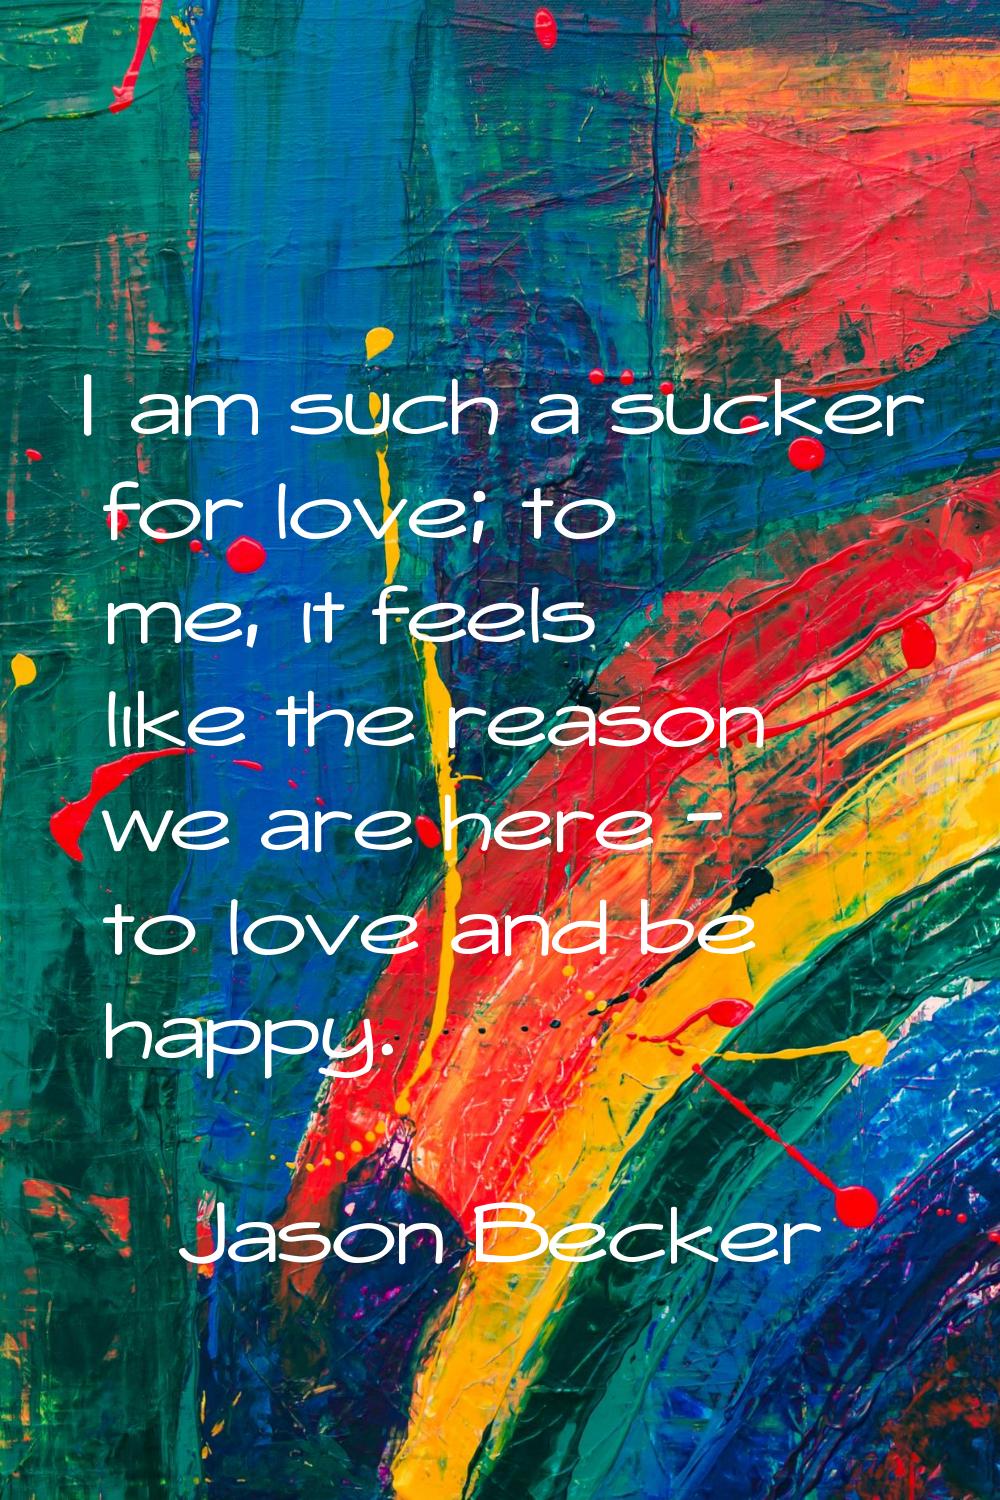 I am such a sucker for love; to me, it feels like the reason we are here - to love and be happy.